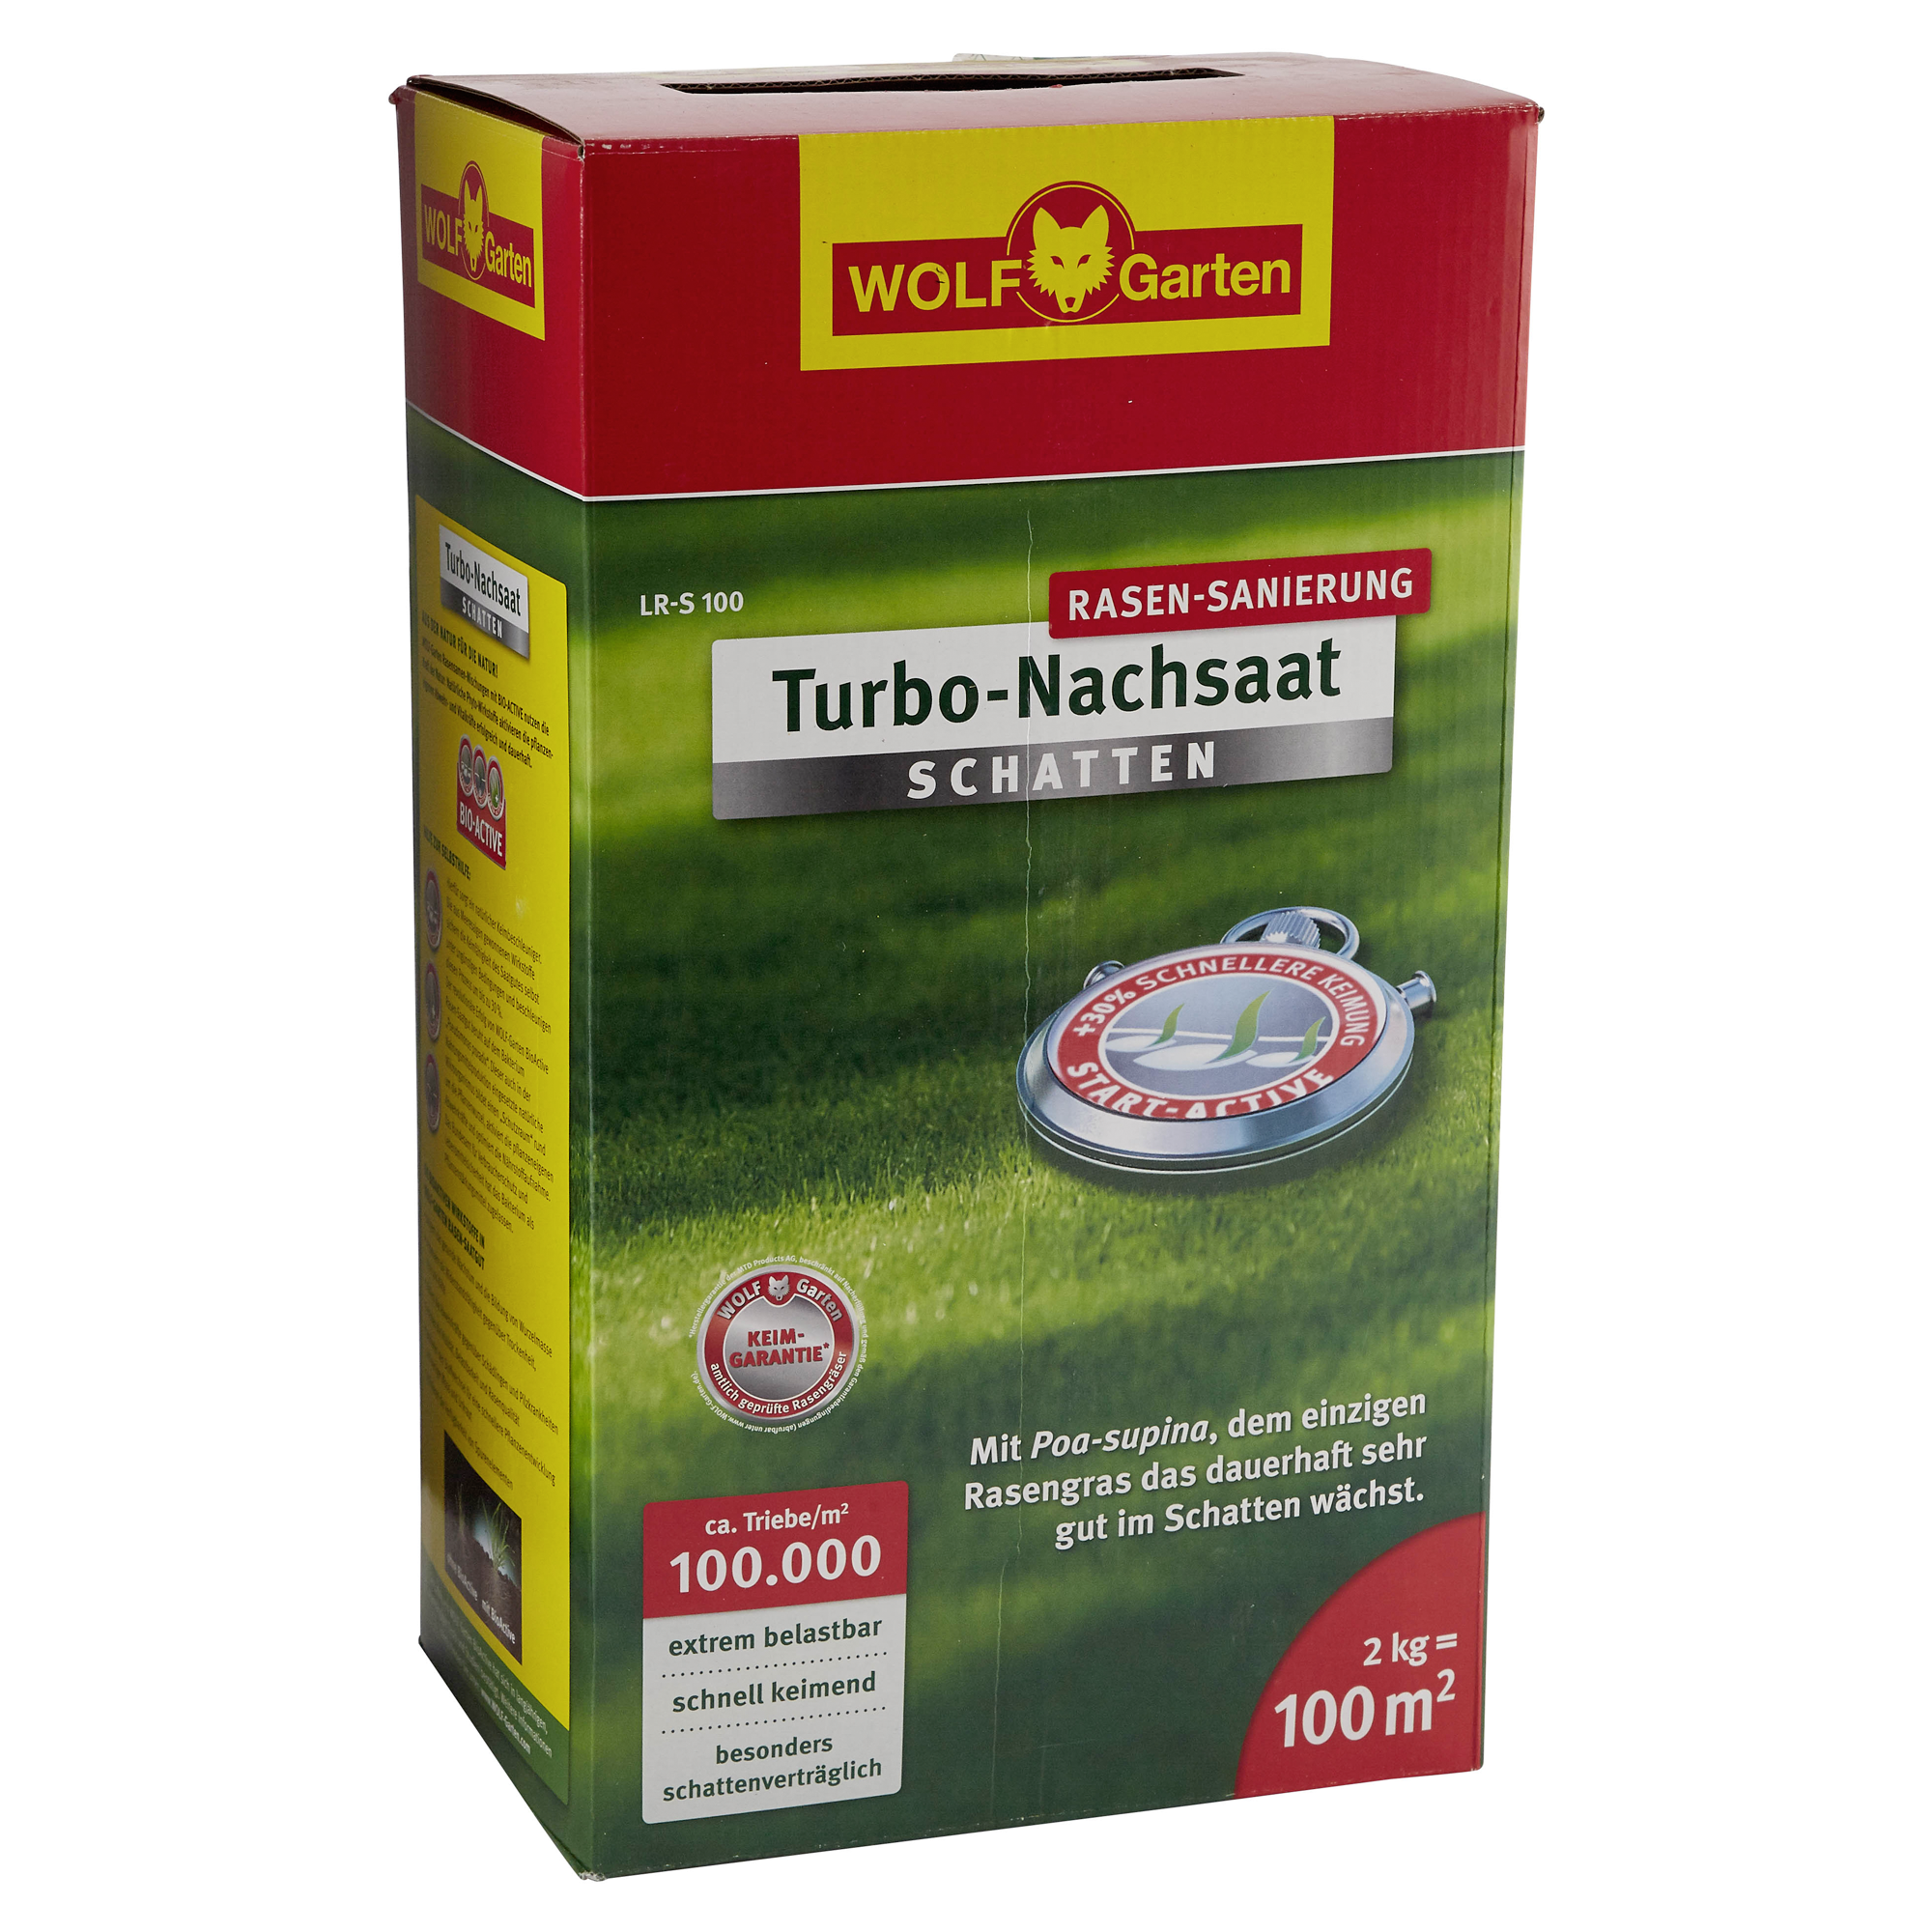 Turbo-Nachsaat Schatten 100 m² 2 kg + product picture